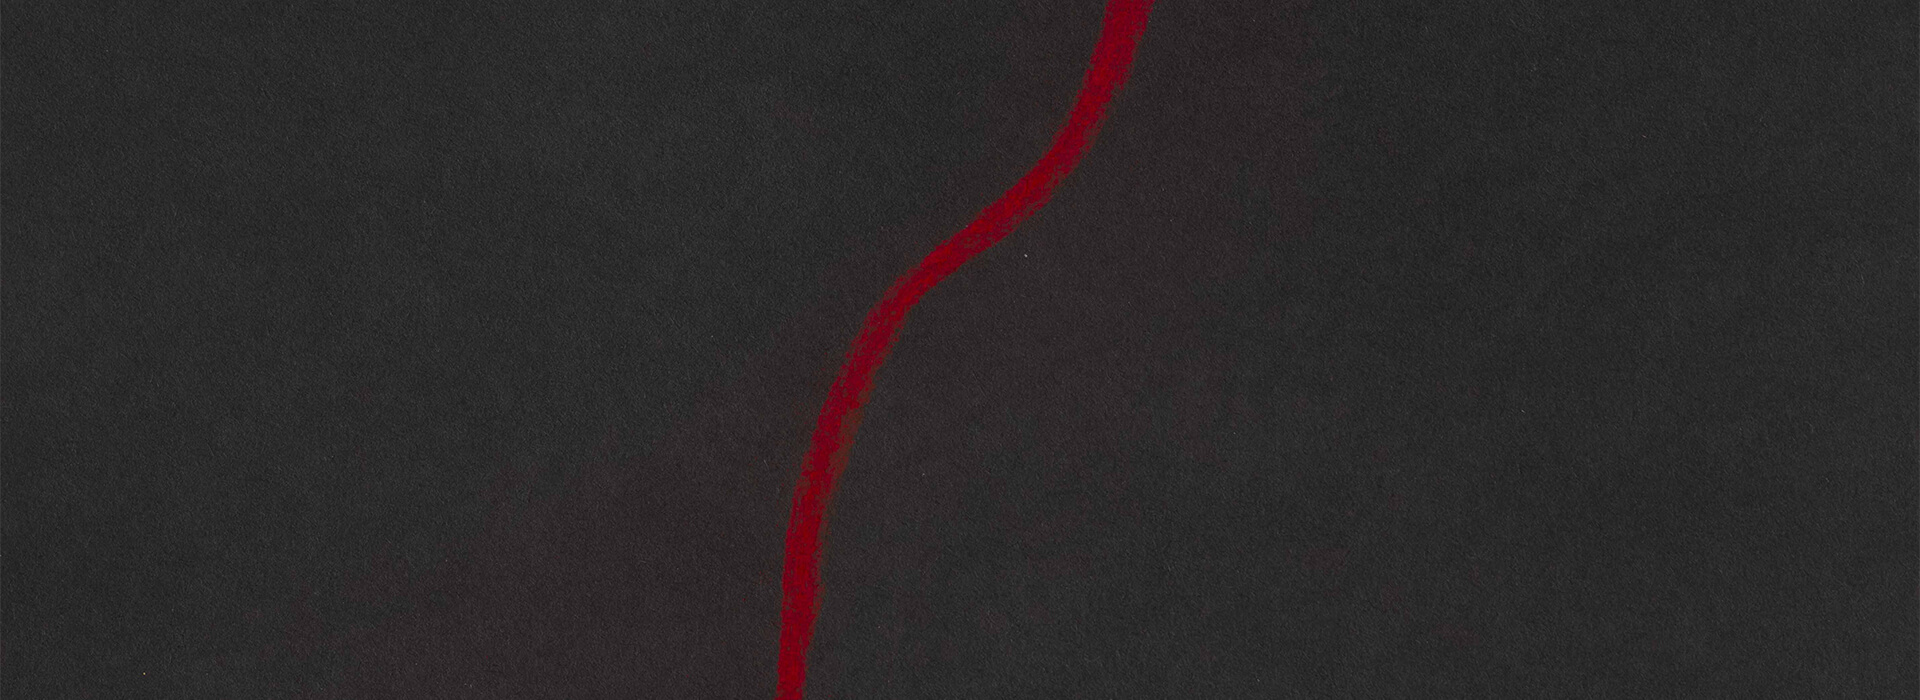 Black construction paper with a red line drawn in pastel moving upwards